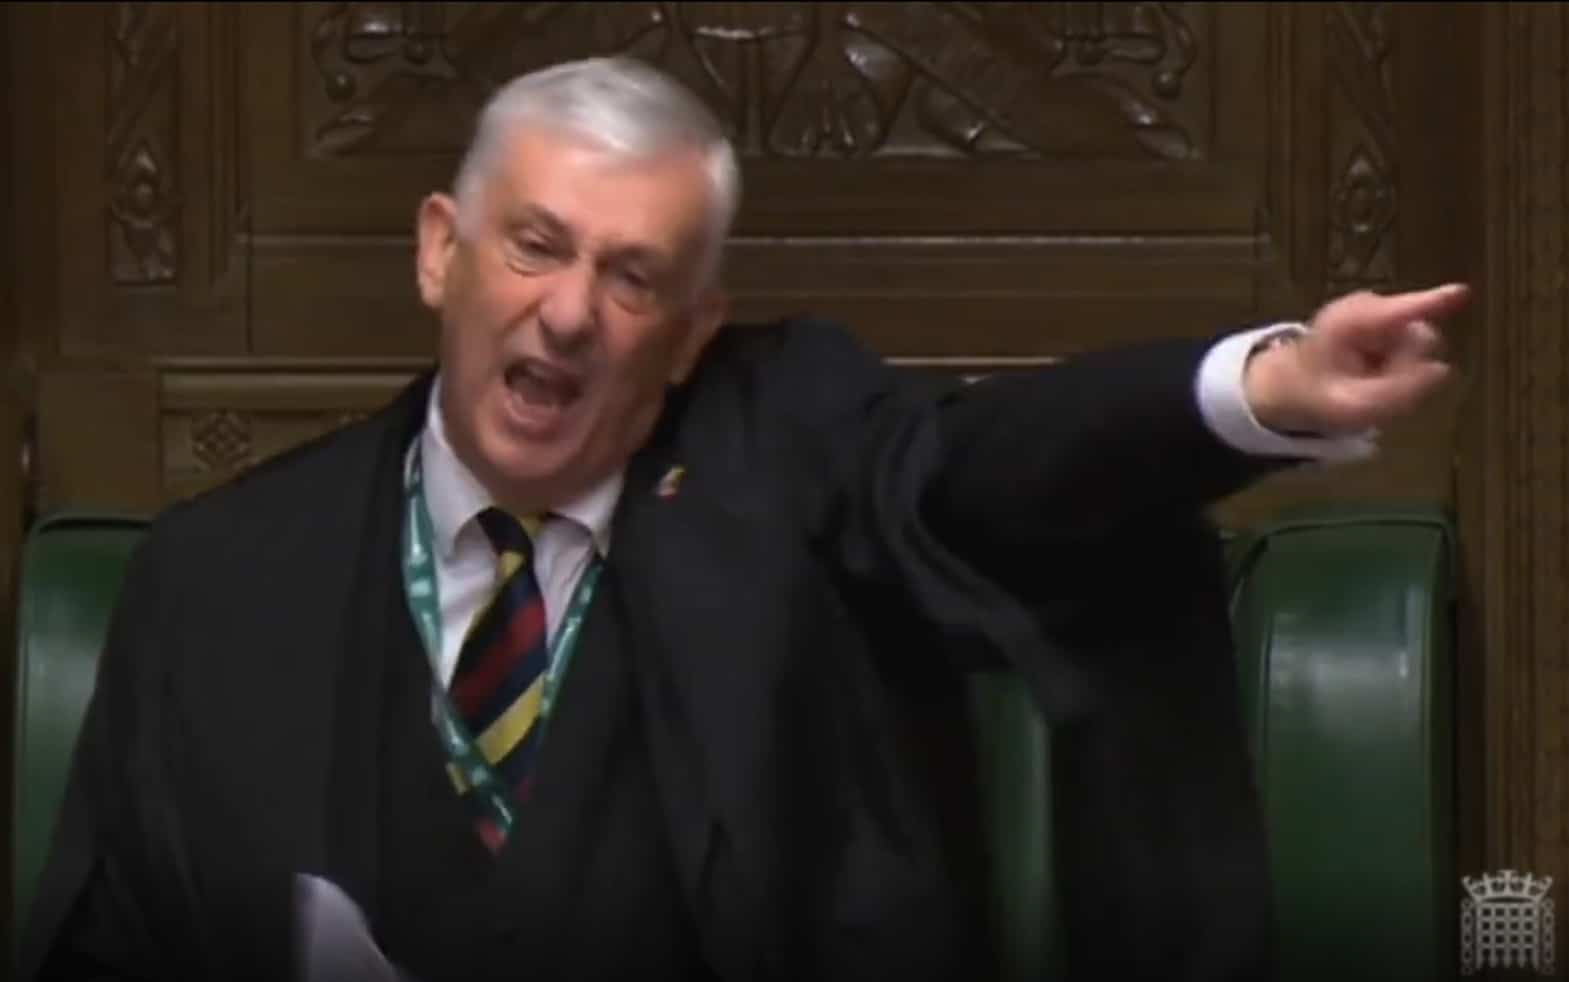 Watch: Alba MPs escorted out of PMQs as session descends into chaos